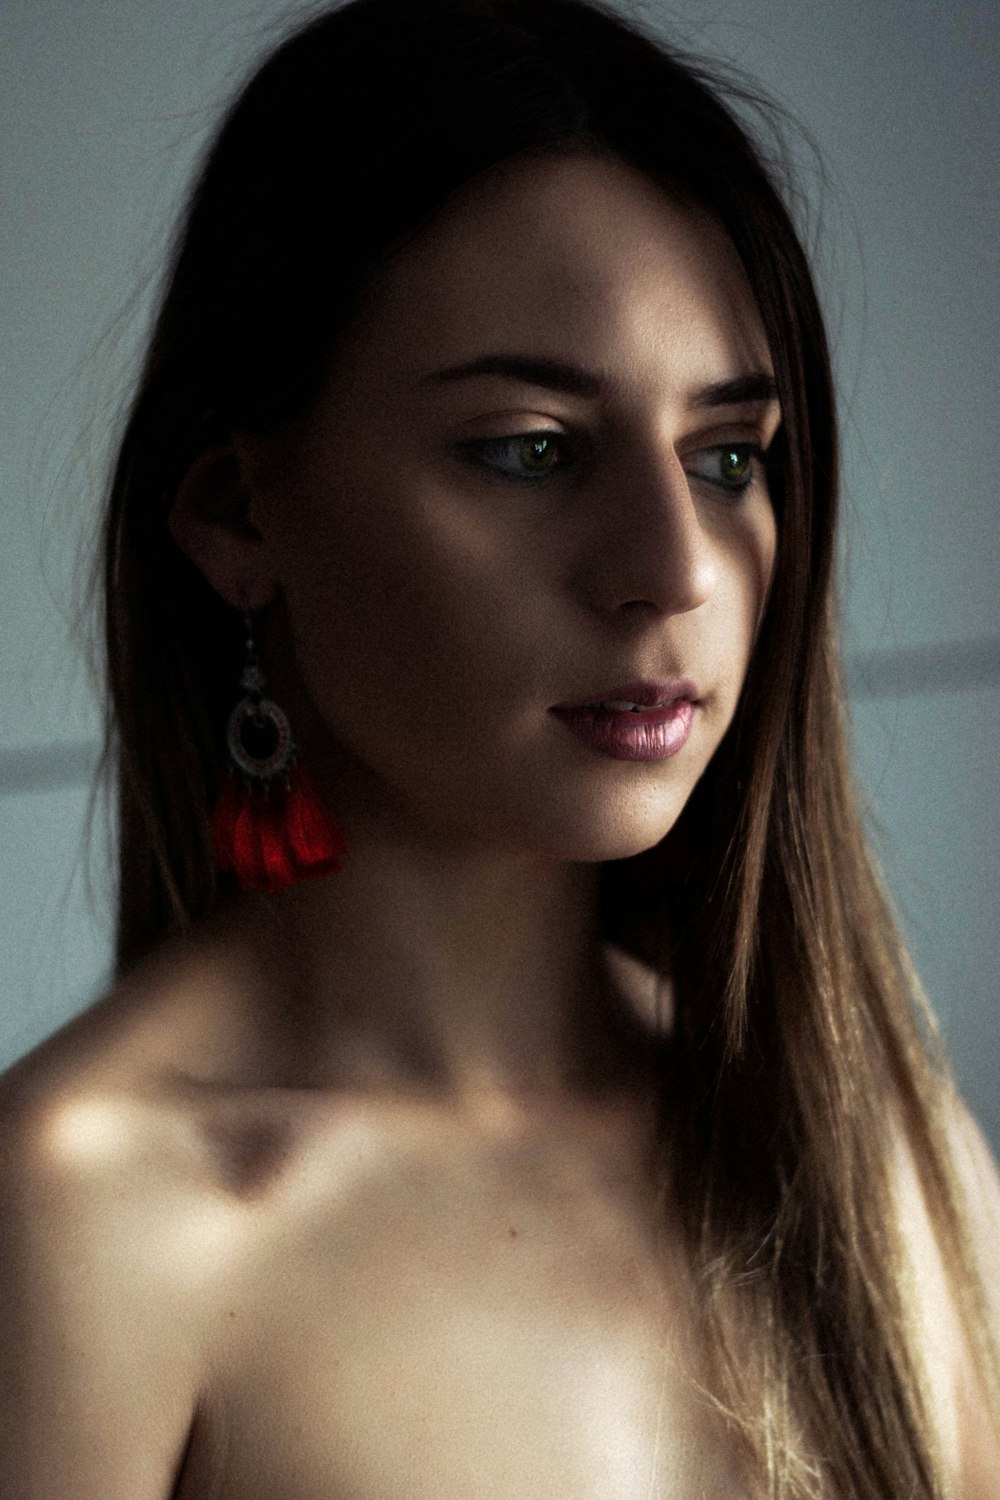 woman with red lipstick and silver earrings